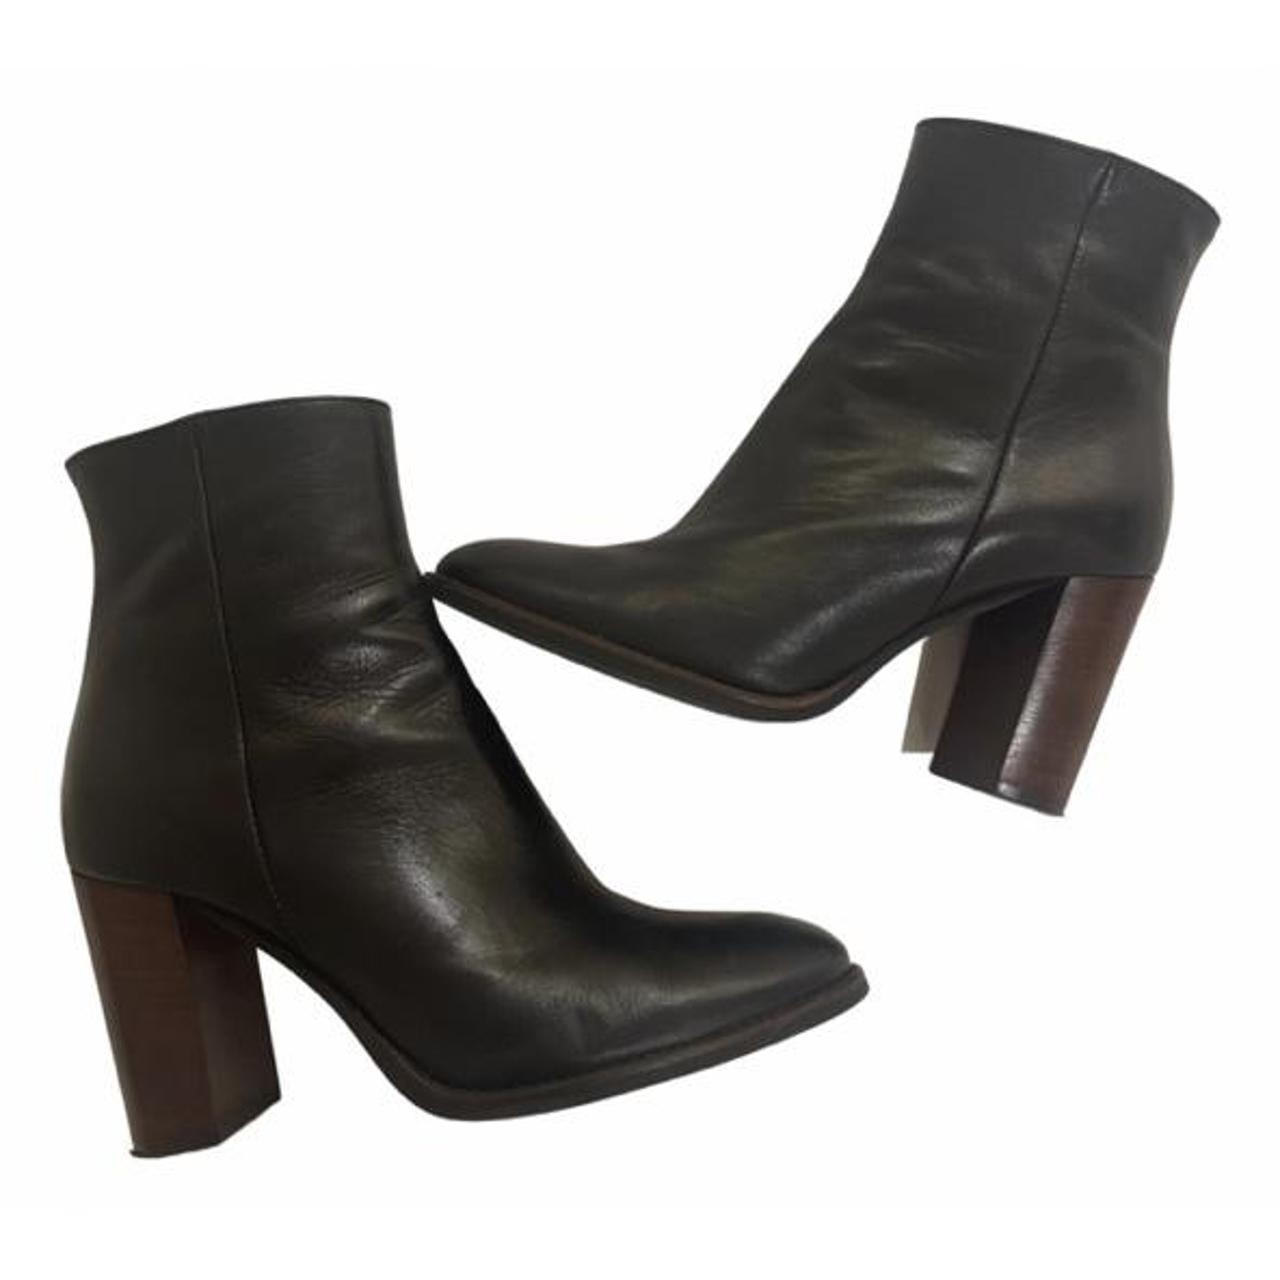 Minelli calfskin ankle boots with wood heel. Retail... - Depop